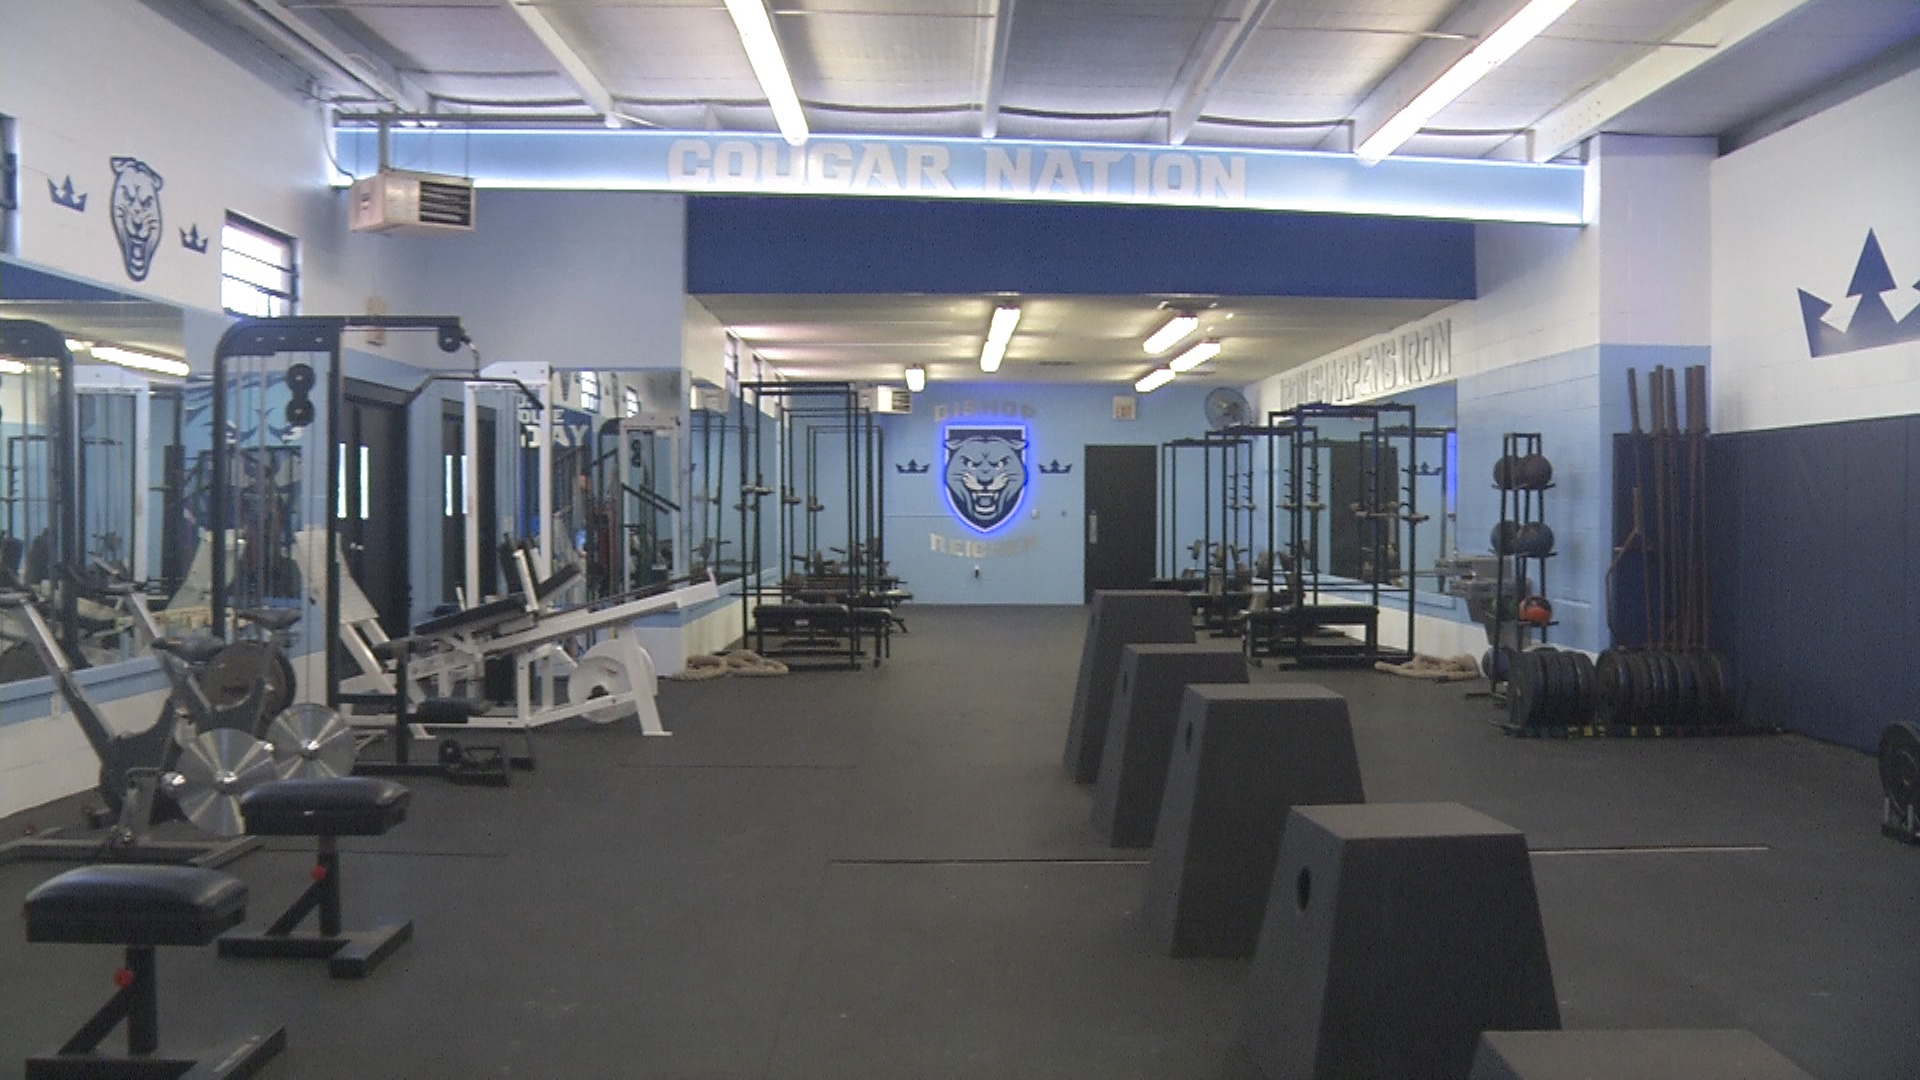 While sports-related construction projects nationwide have been put on hold, Bishop Reicher Catholic High School in Waco is continuing to update its facilities.